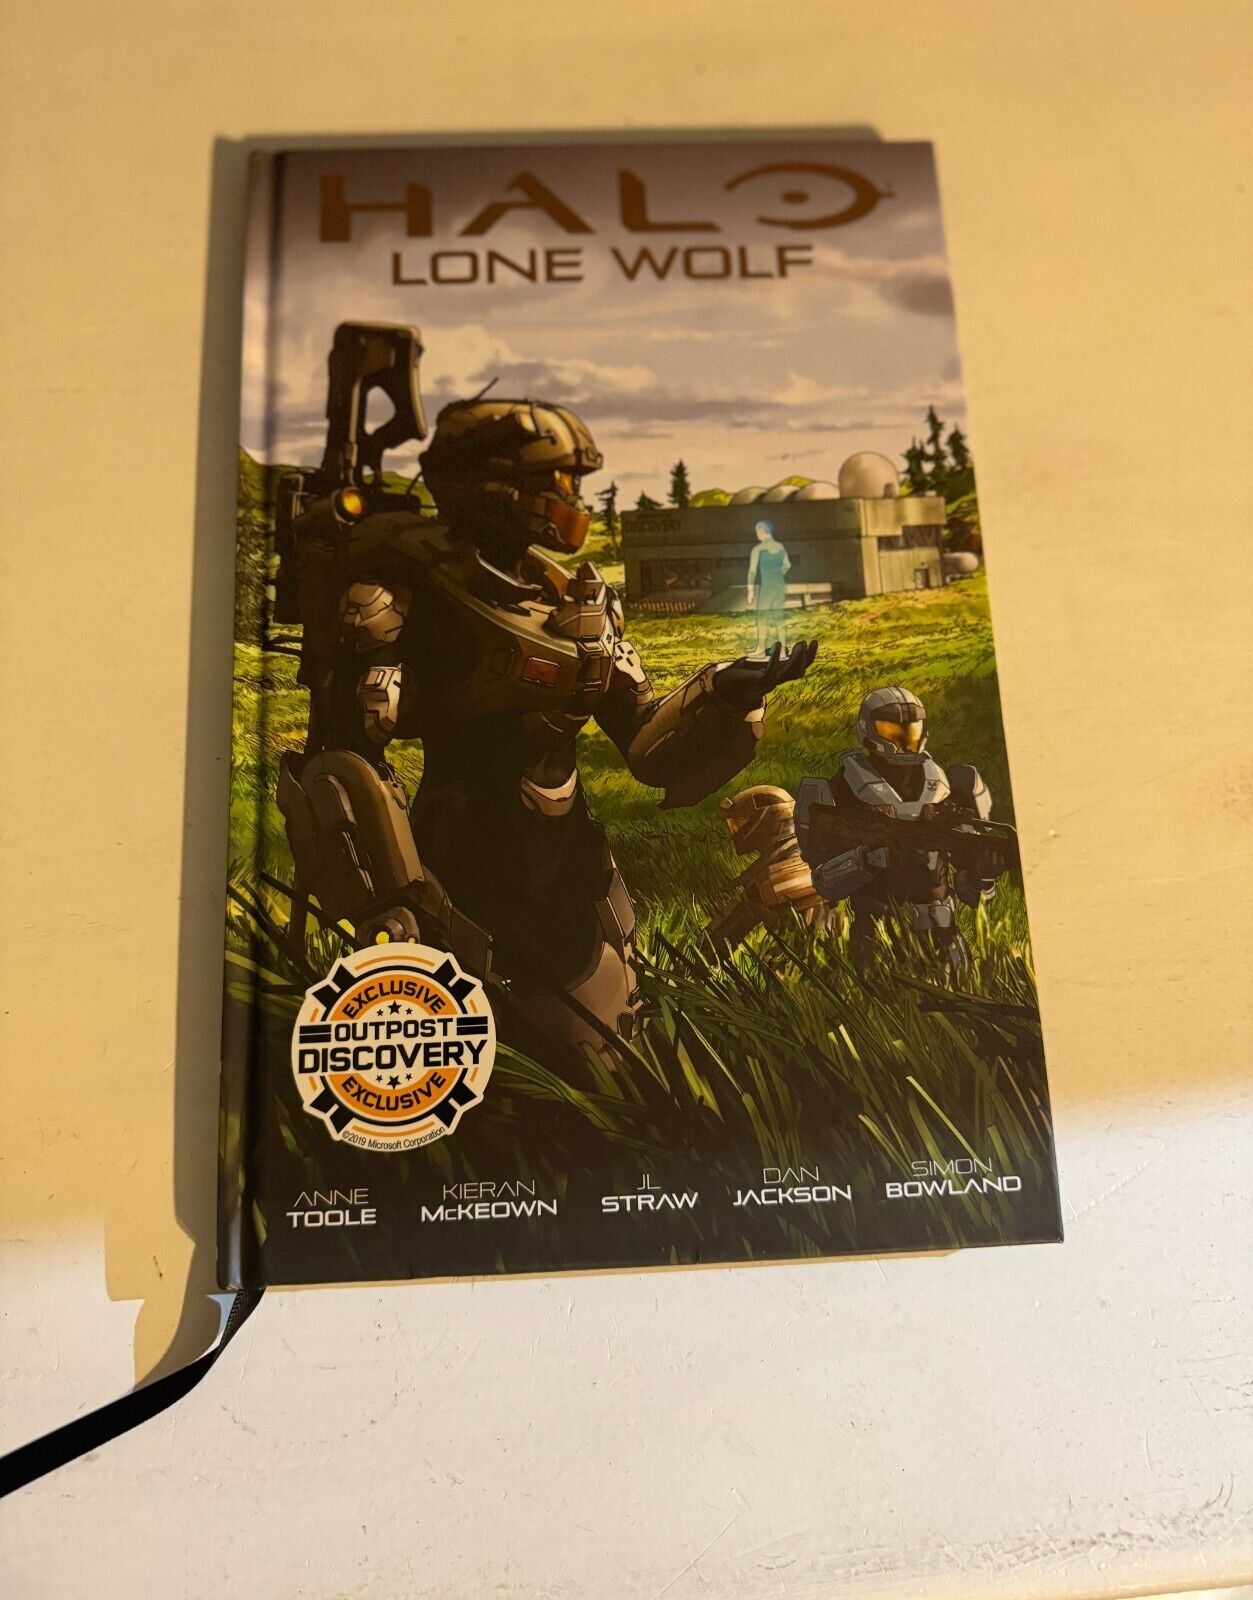 Halo Lone Wolf Outpost Discovery Exclusive